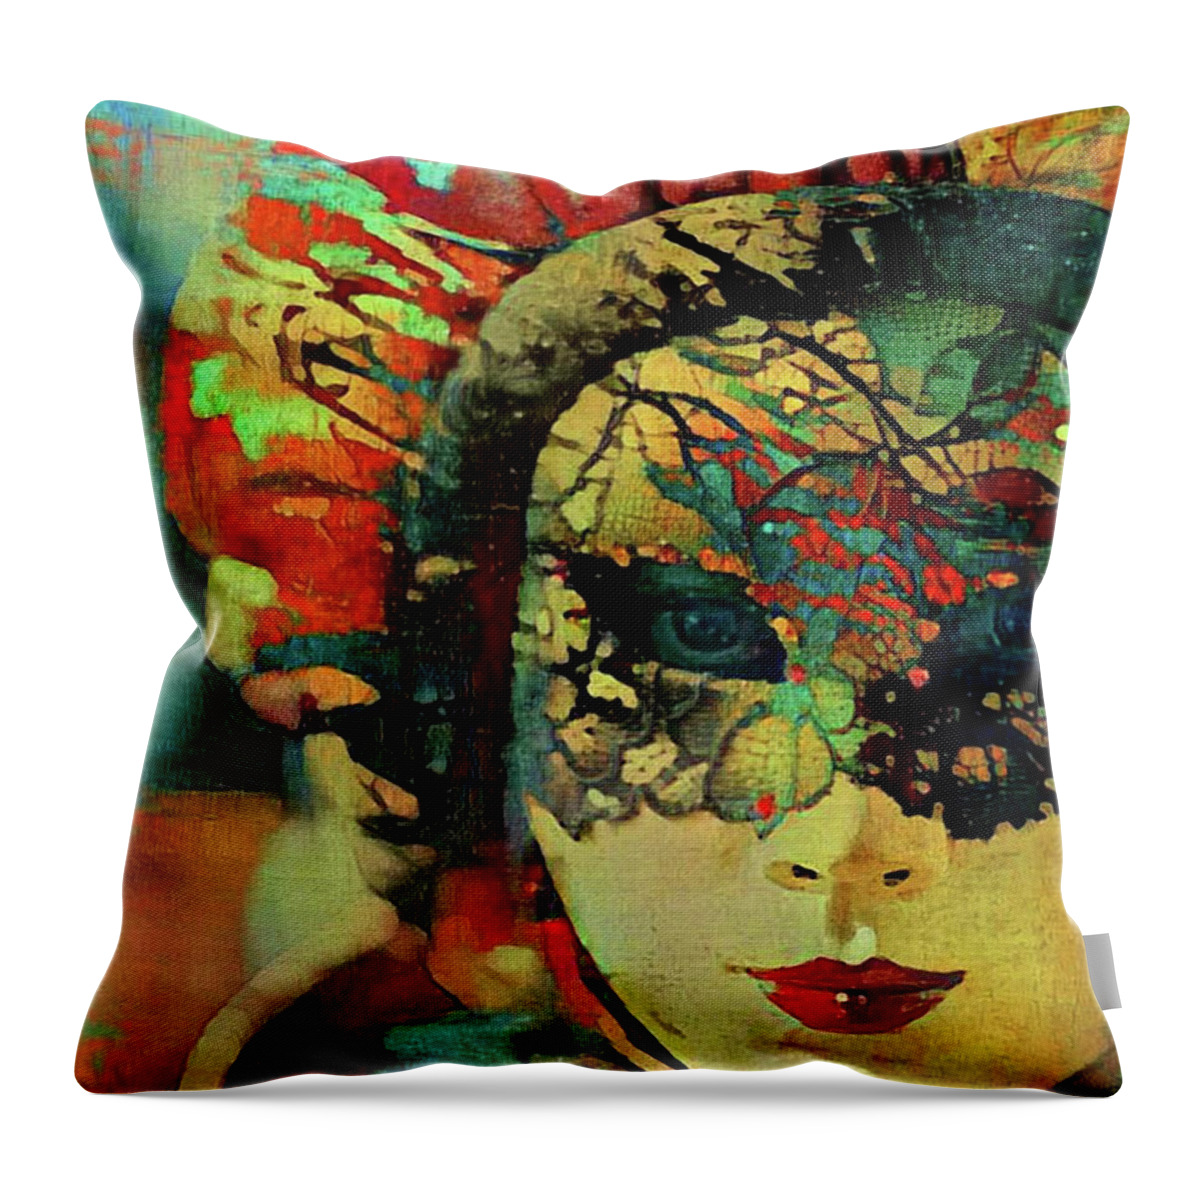 Mysterious Throw Pillow featuring the mixed media Mysterious mask by Lilia D